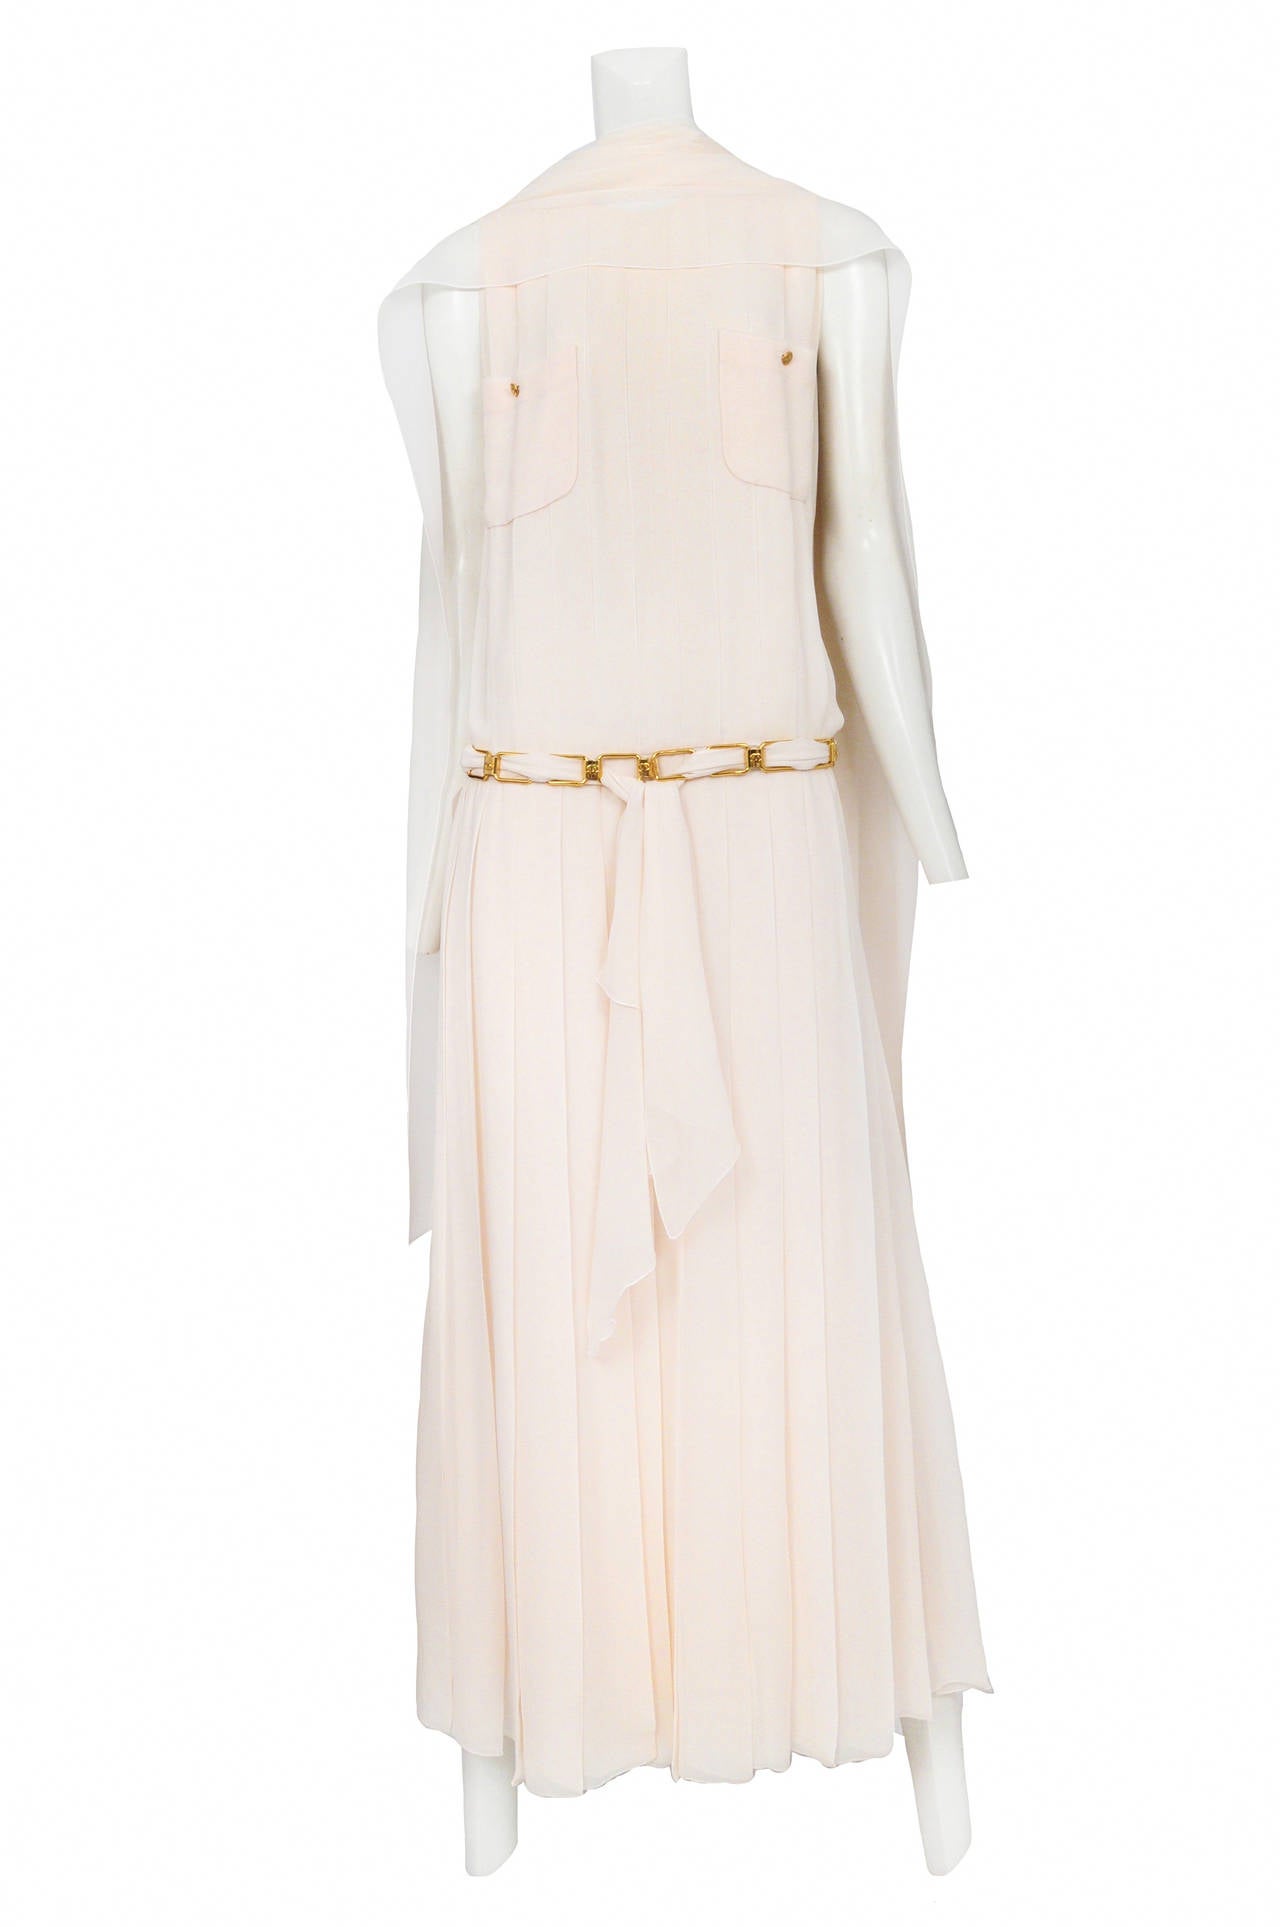 Vintage Chanel 1920's style ivory button back drop waist dress featuring pleating throughout, two pockets at chest adorned with gold buttons and a gold link belt threaded with matching ivory chiffon that sits low on waist. The dress comes with a